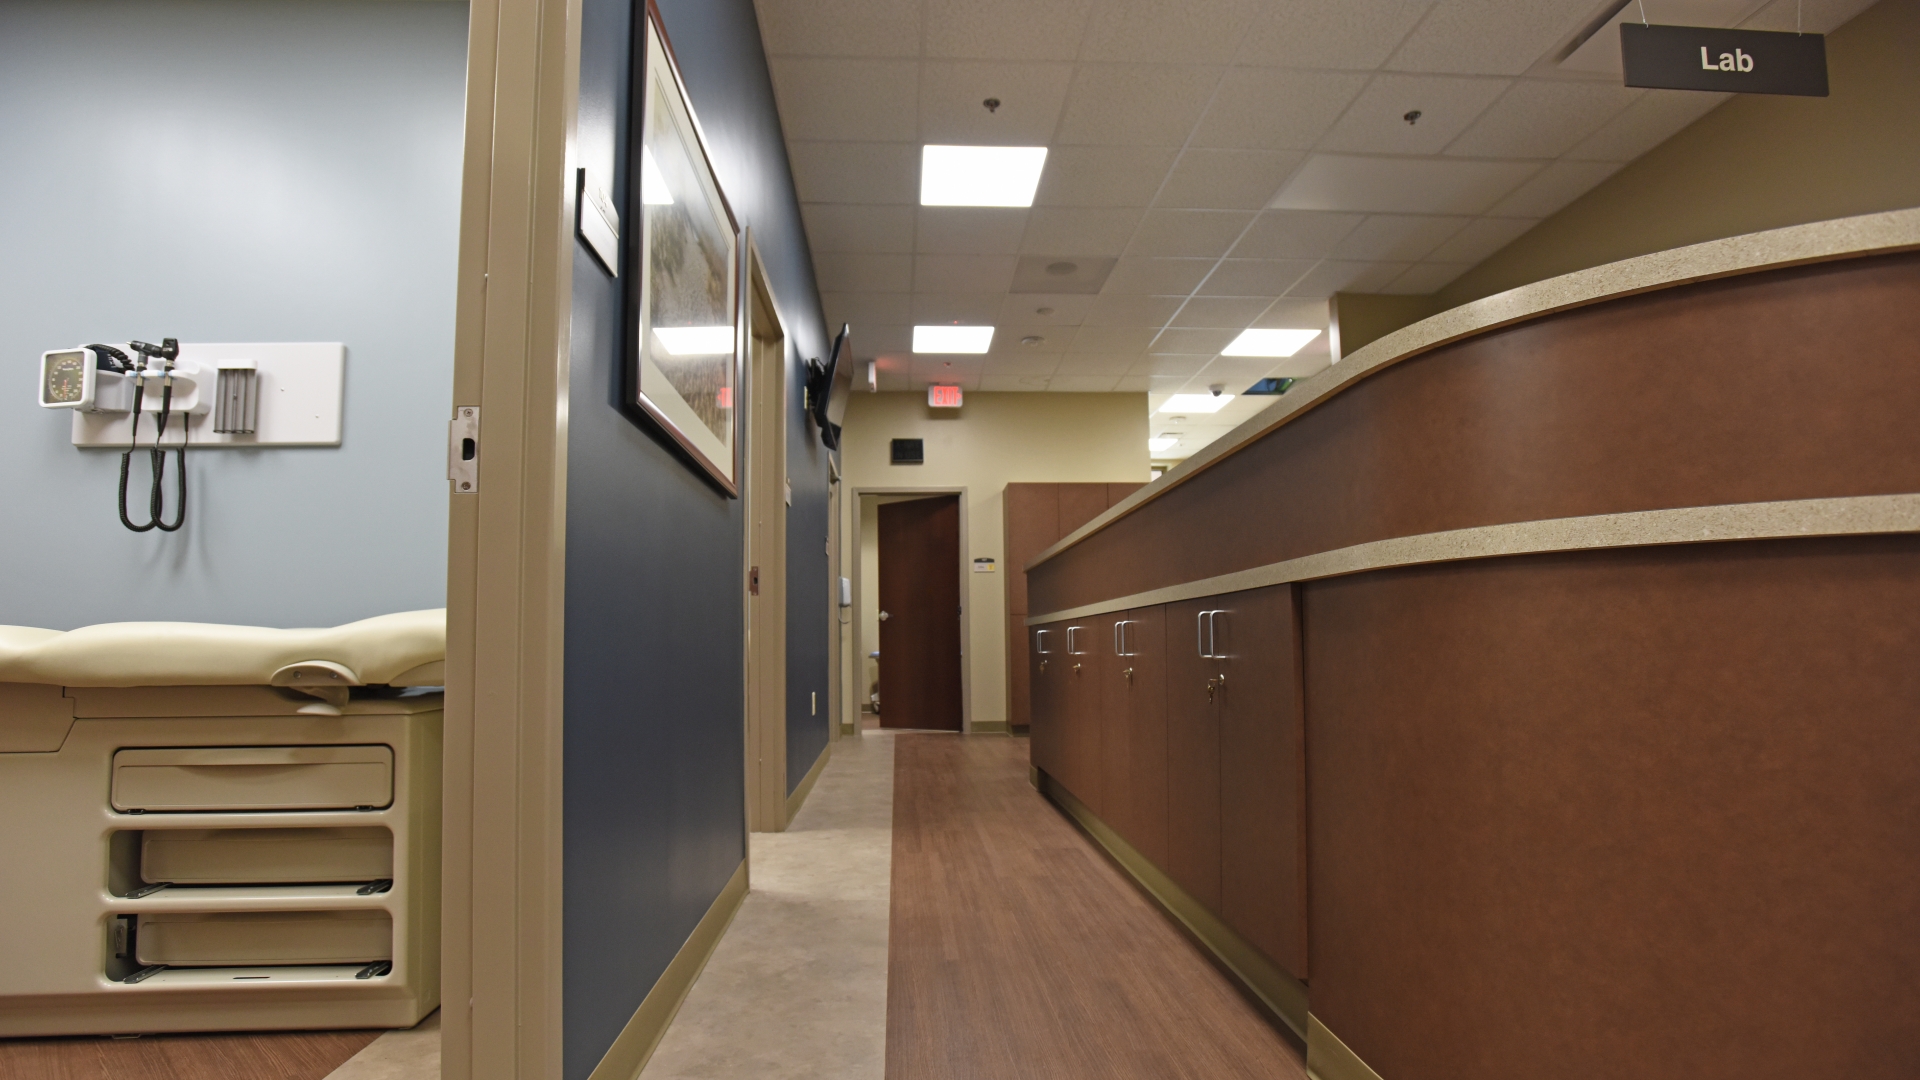 Atrium Health is opening two new urgent care locations to bring more access to care in South and Northwest Charlotte: Atrium Health Urgent Care Rea Farms and Atrium Health Urgent Care University City.